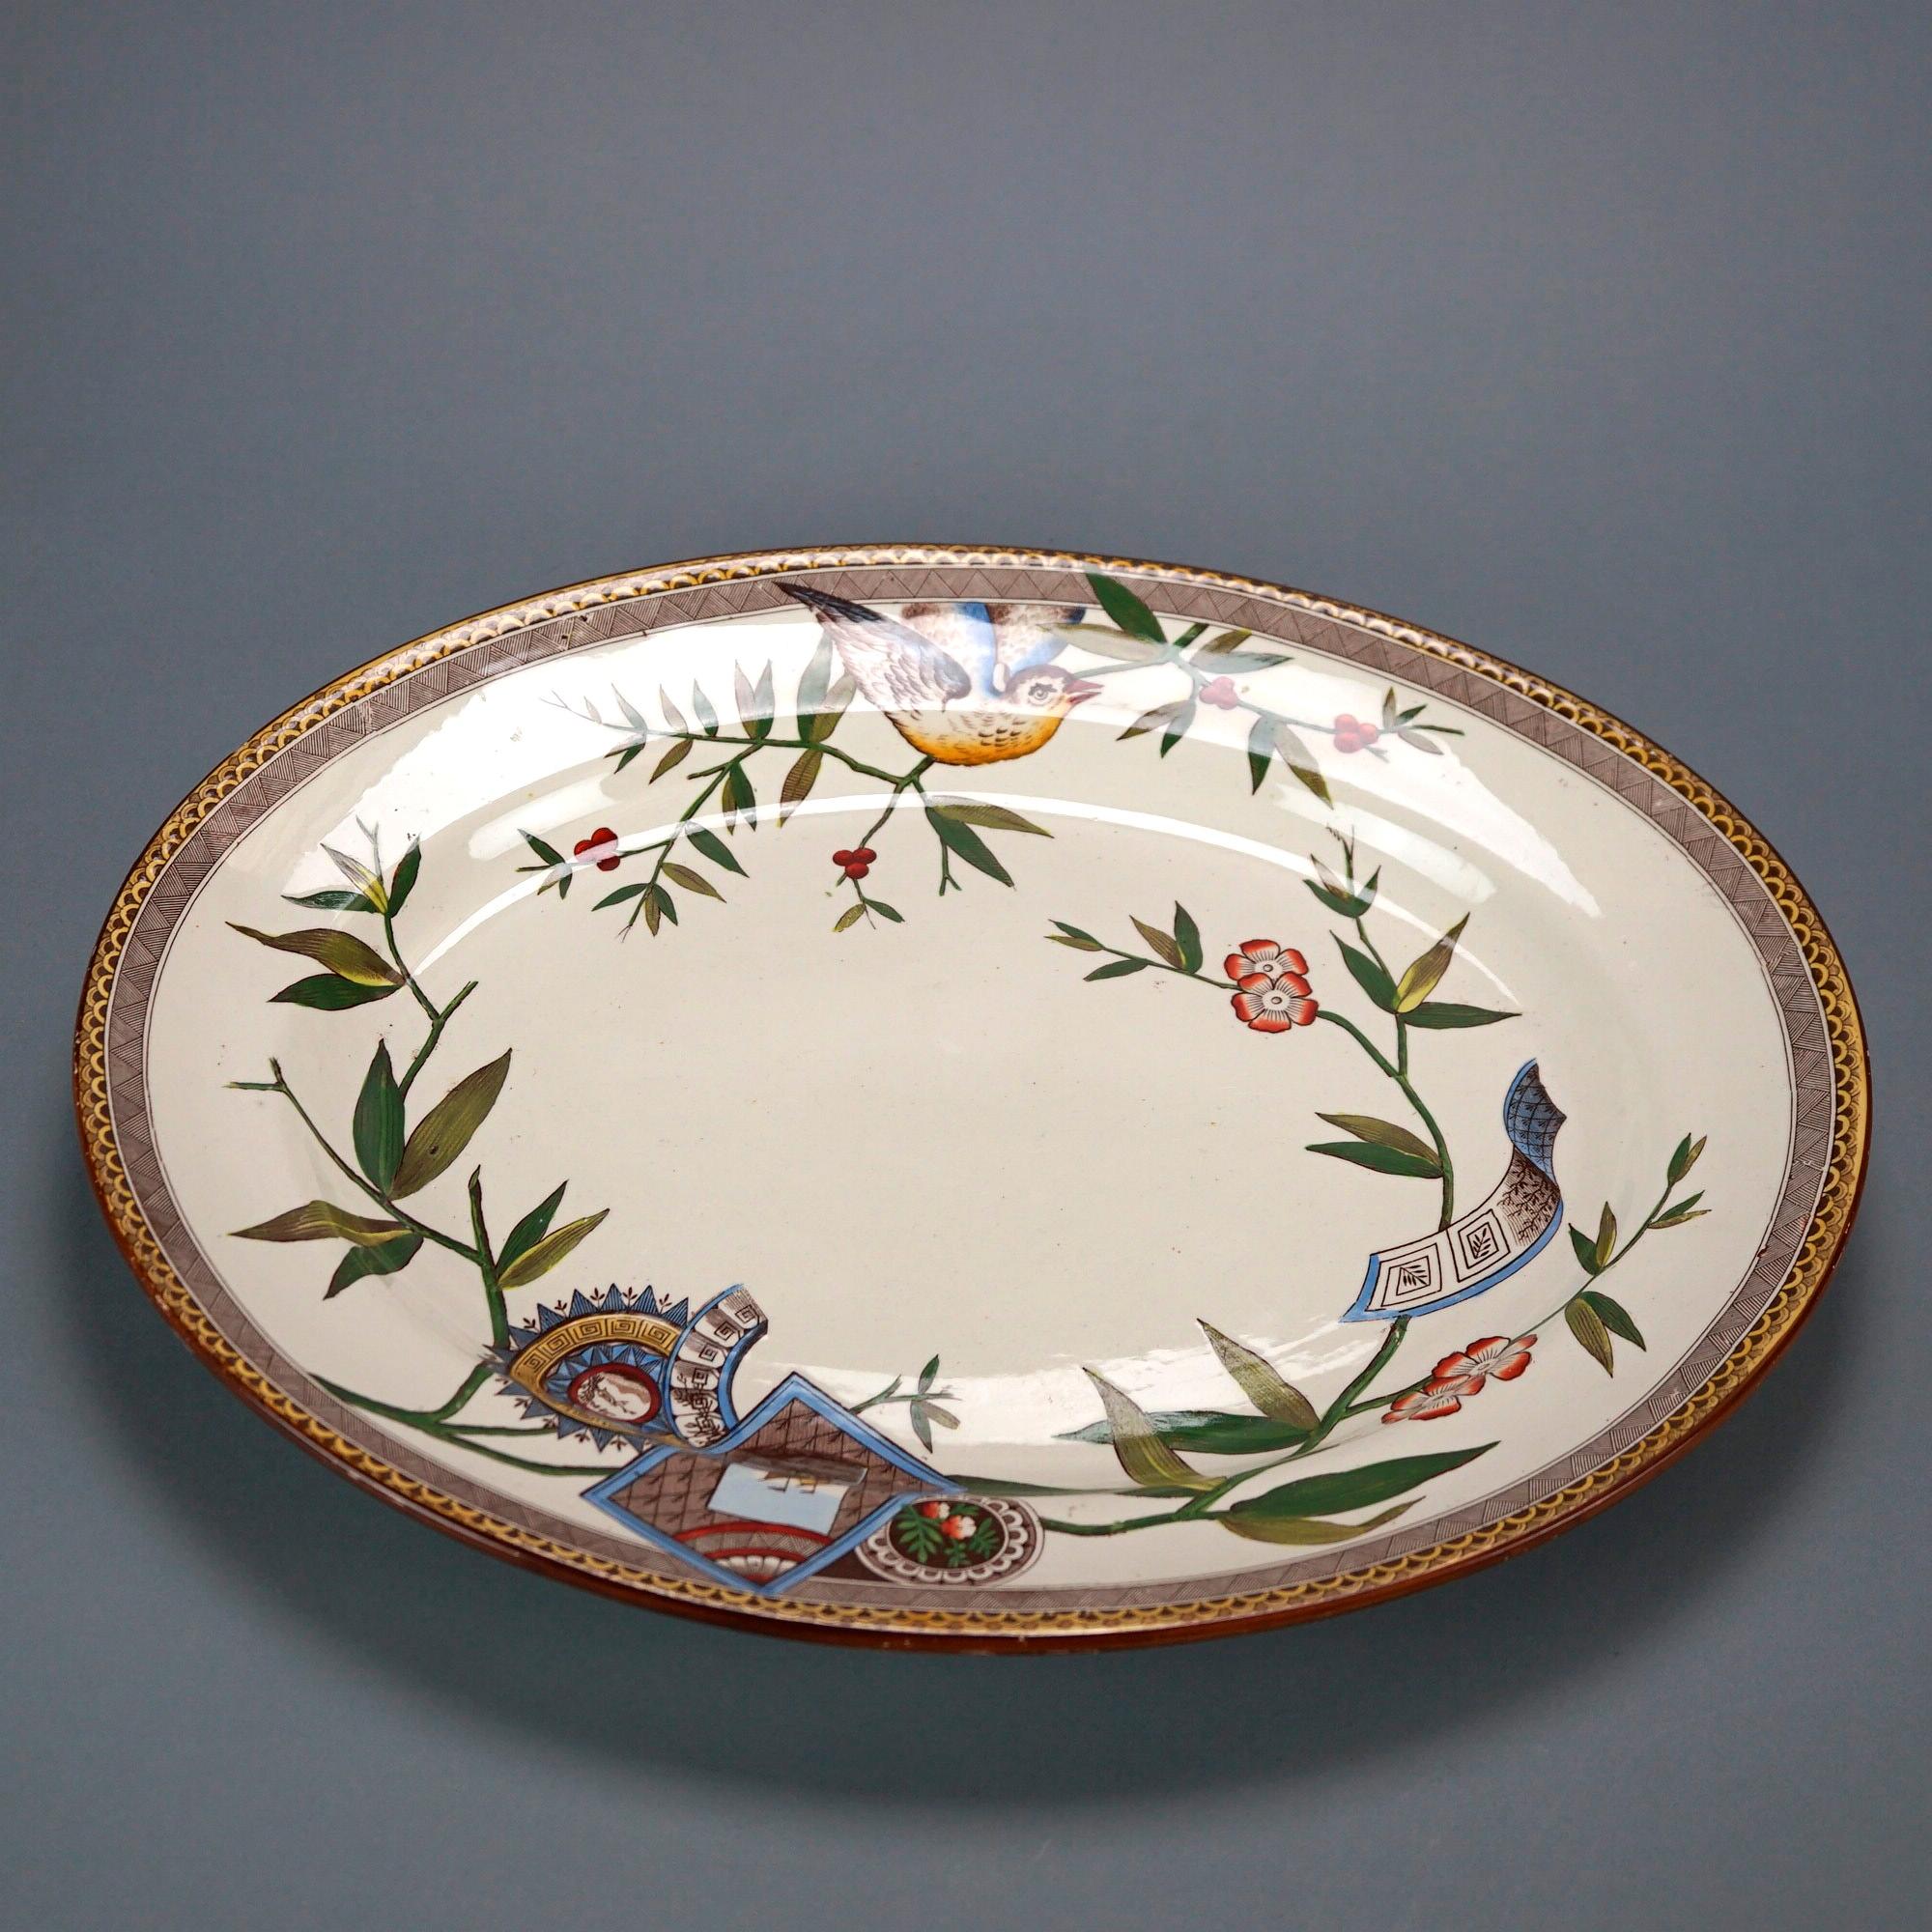 An antique Aesthetic Movement serving platter by Wedgwood offers porcelain construction in oval form with bird and garden elements, gilt highlights throughout, en verso maker mark as photographed, 19th century

Measures- 18.25'' H x 14.5'' W x